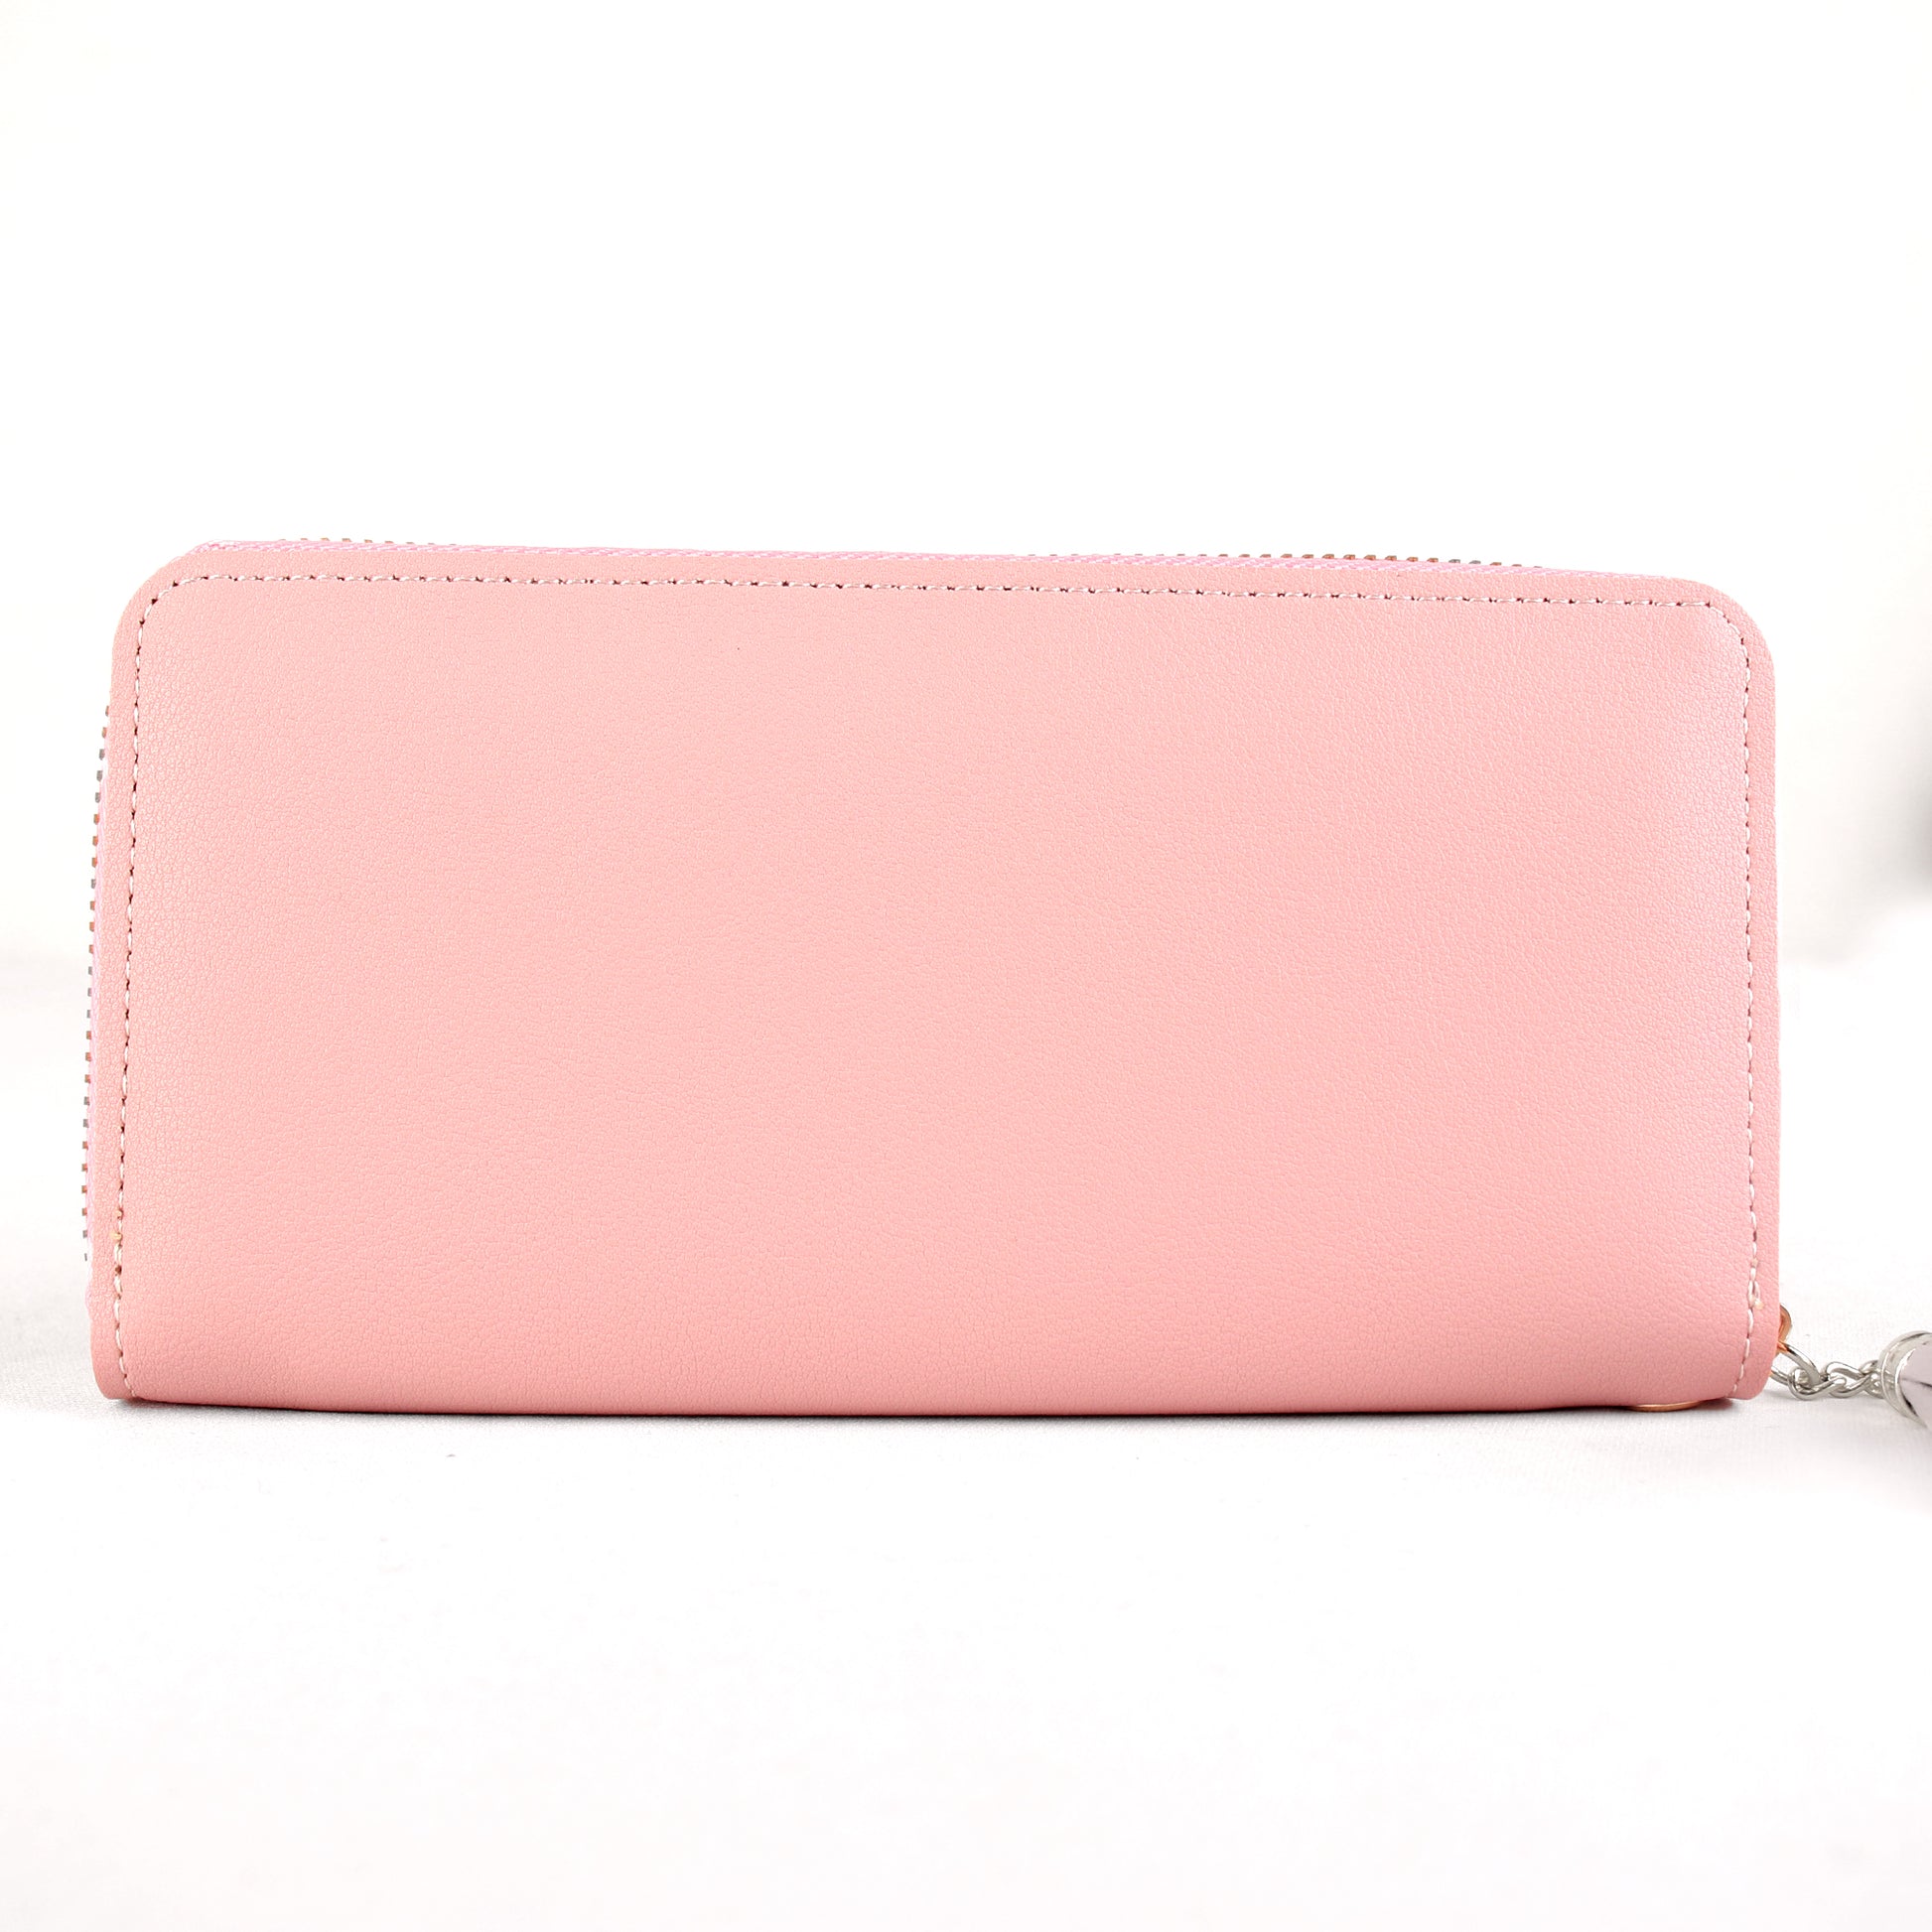 Wallet,The Envelope Wallet in shades of Pink - Cippele Multi Store